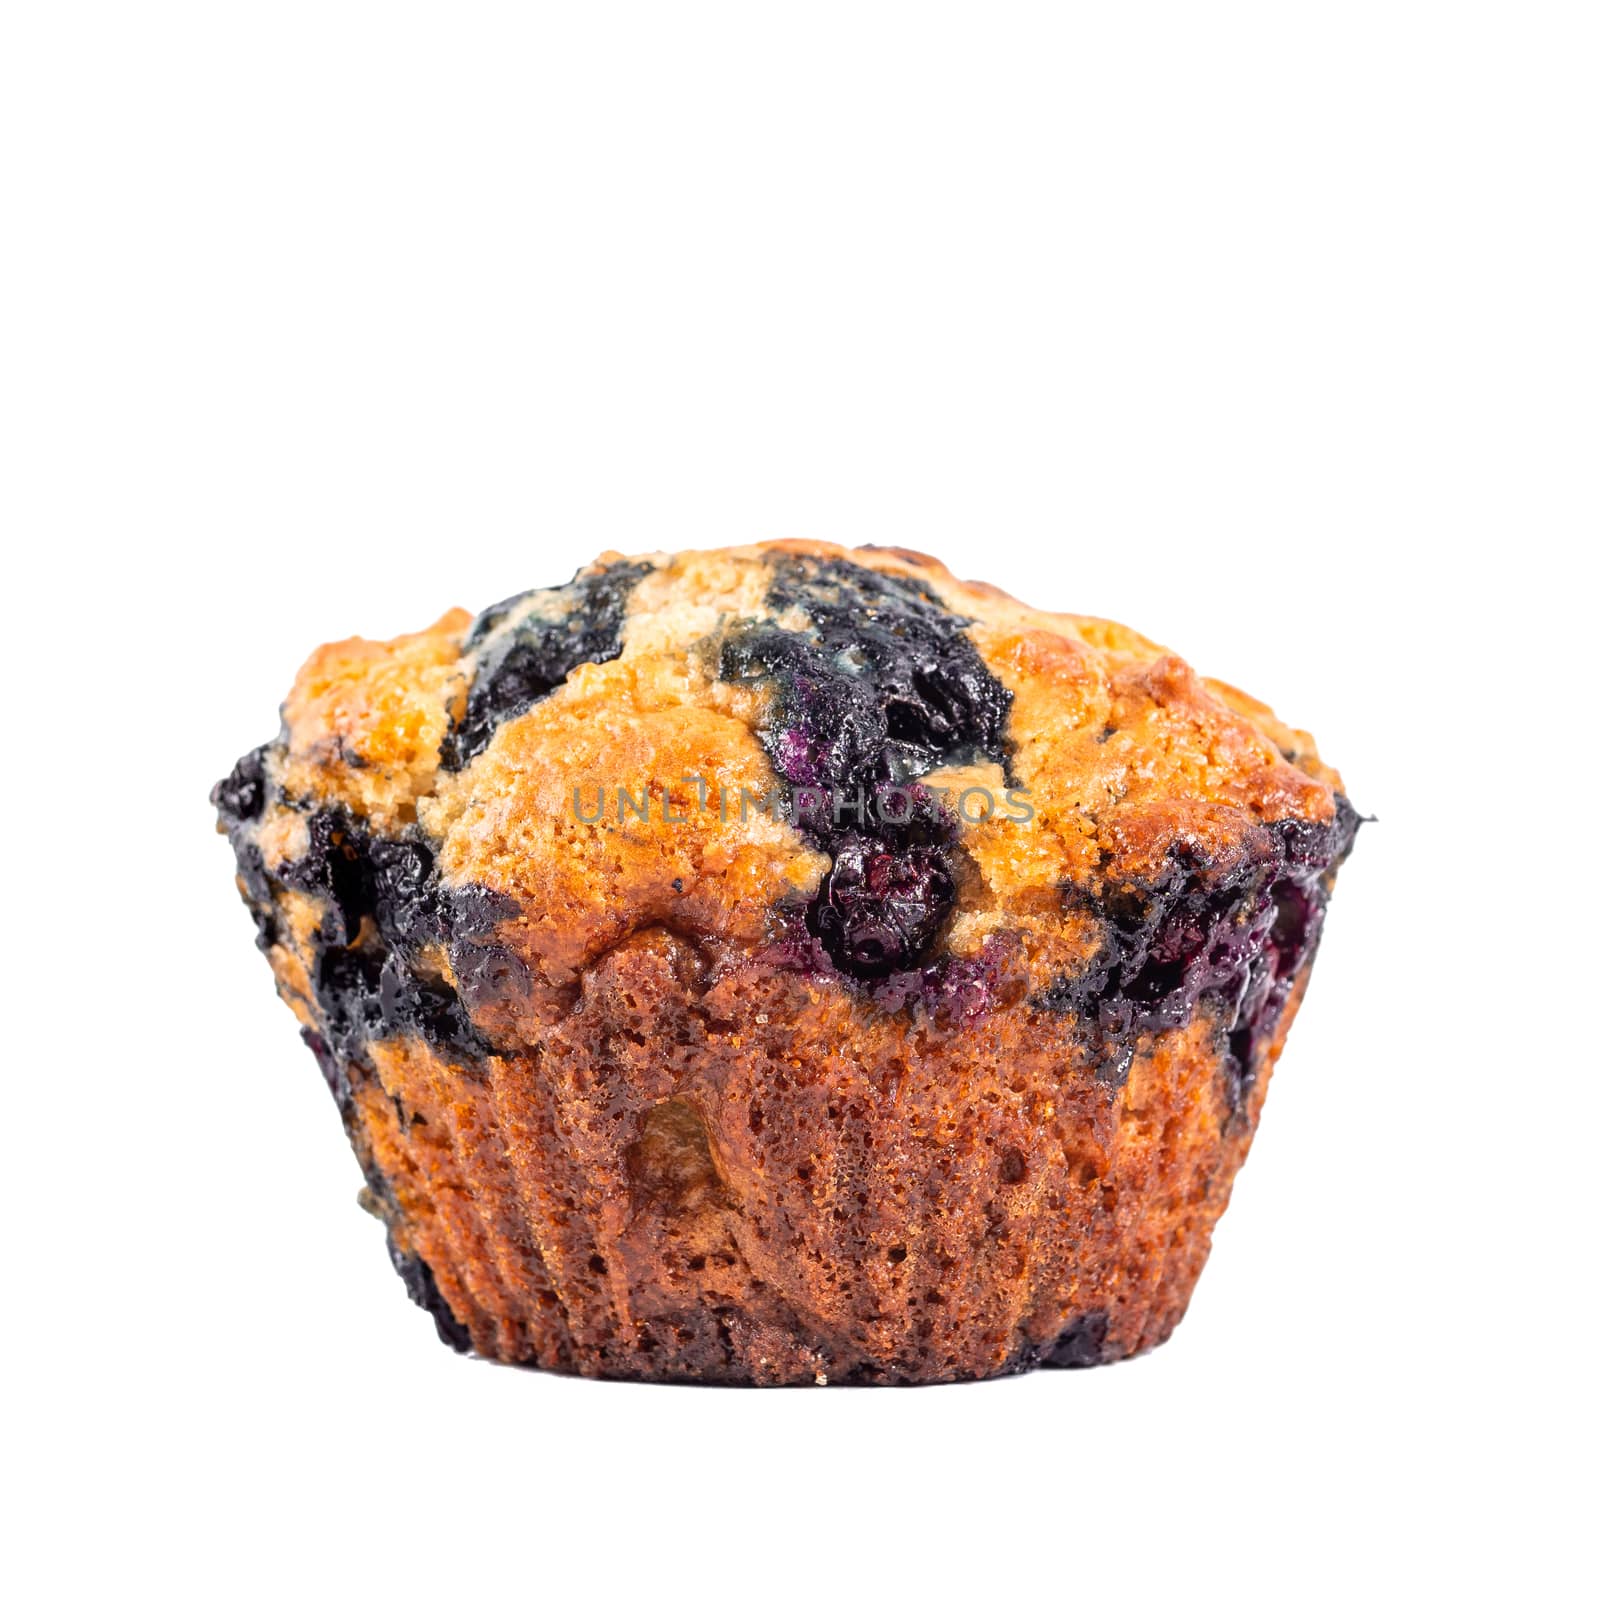 Homemade vegan blueberry muffin isolated. Vegetarian egg-free muffin with blue berries isolated on whte with clipping path.